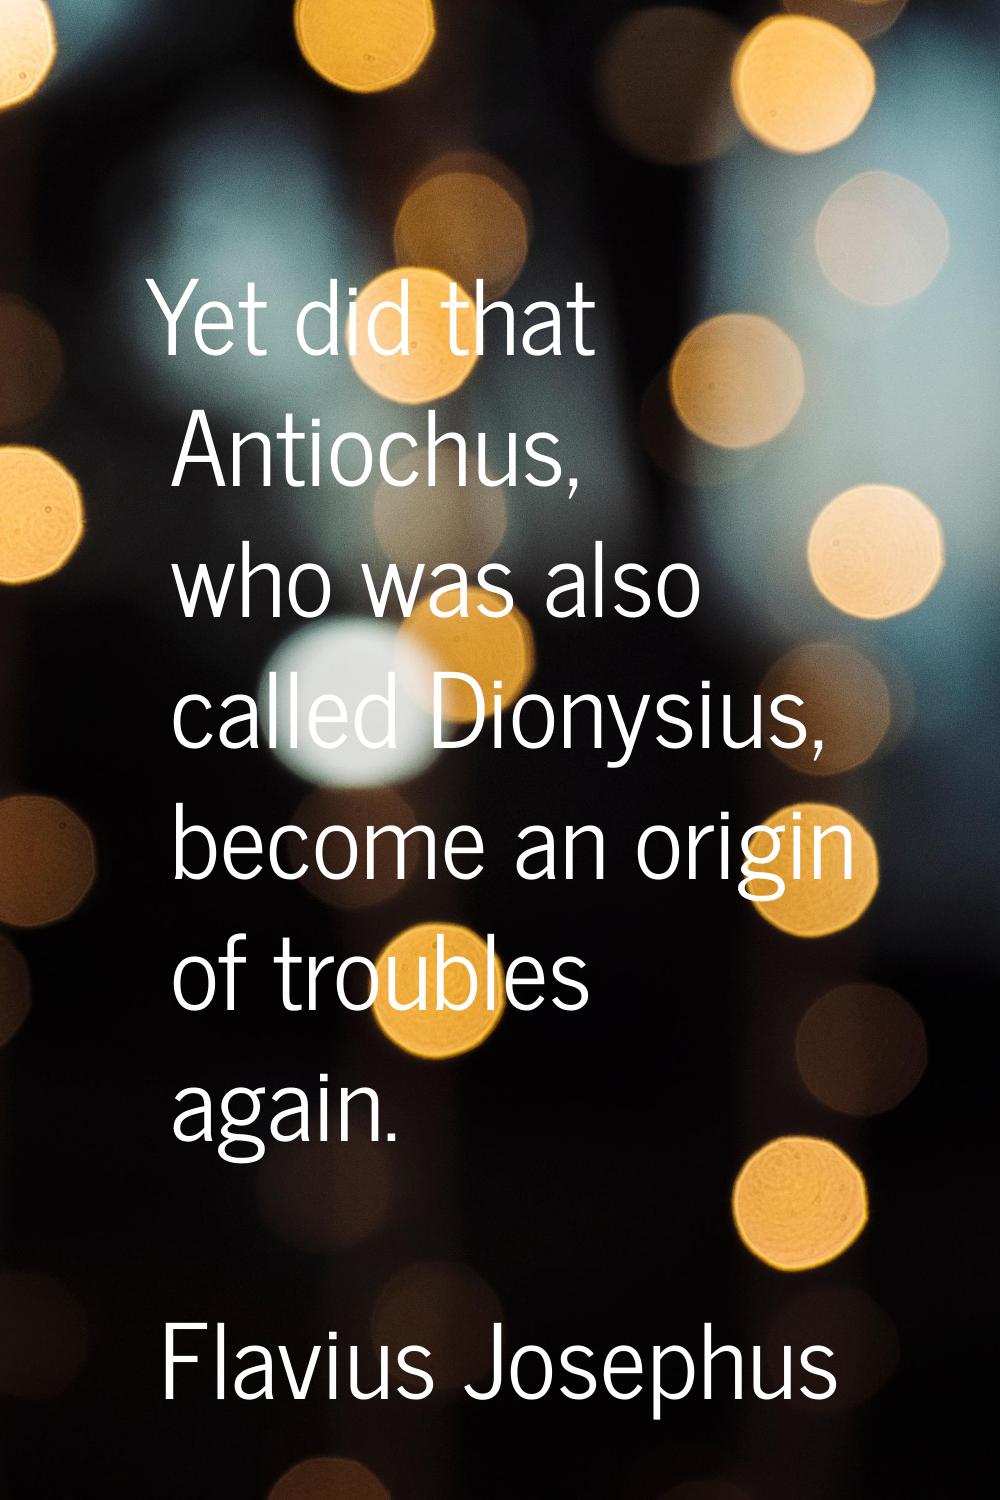 Yet did that Antiochus, who was also called Dionysius, become an origin of troubles again.